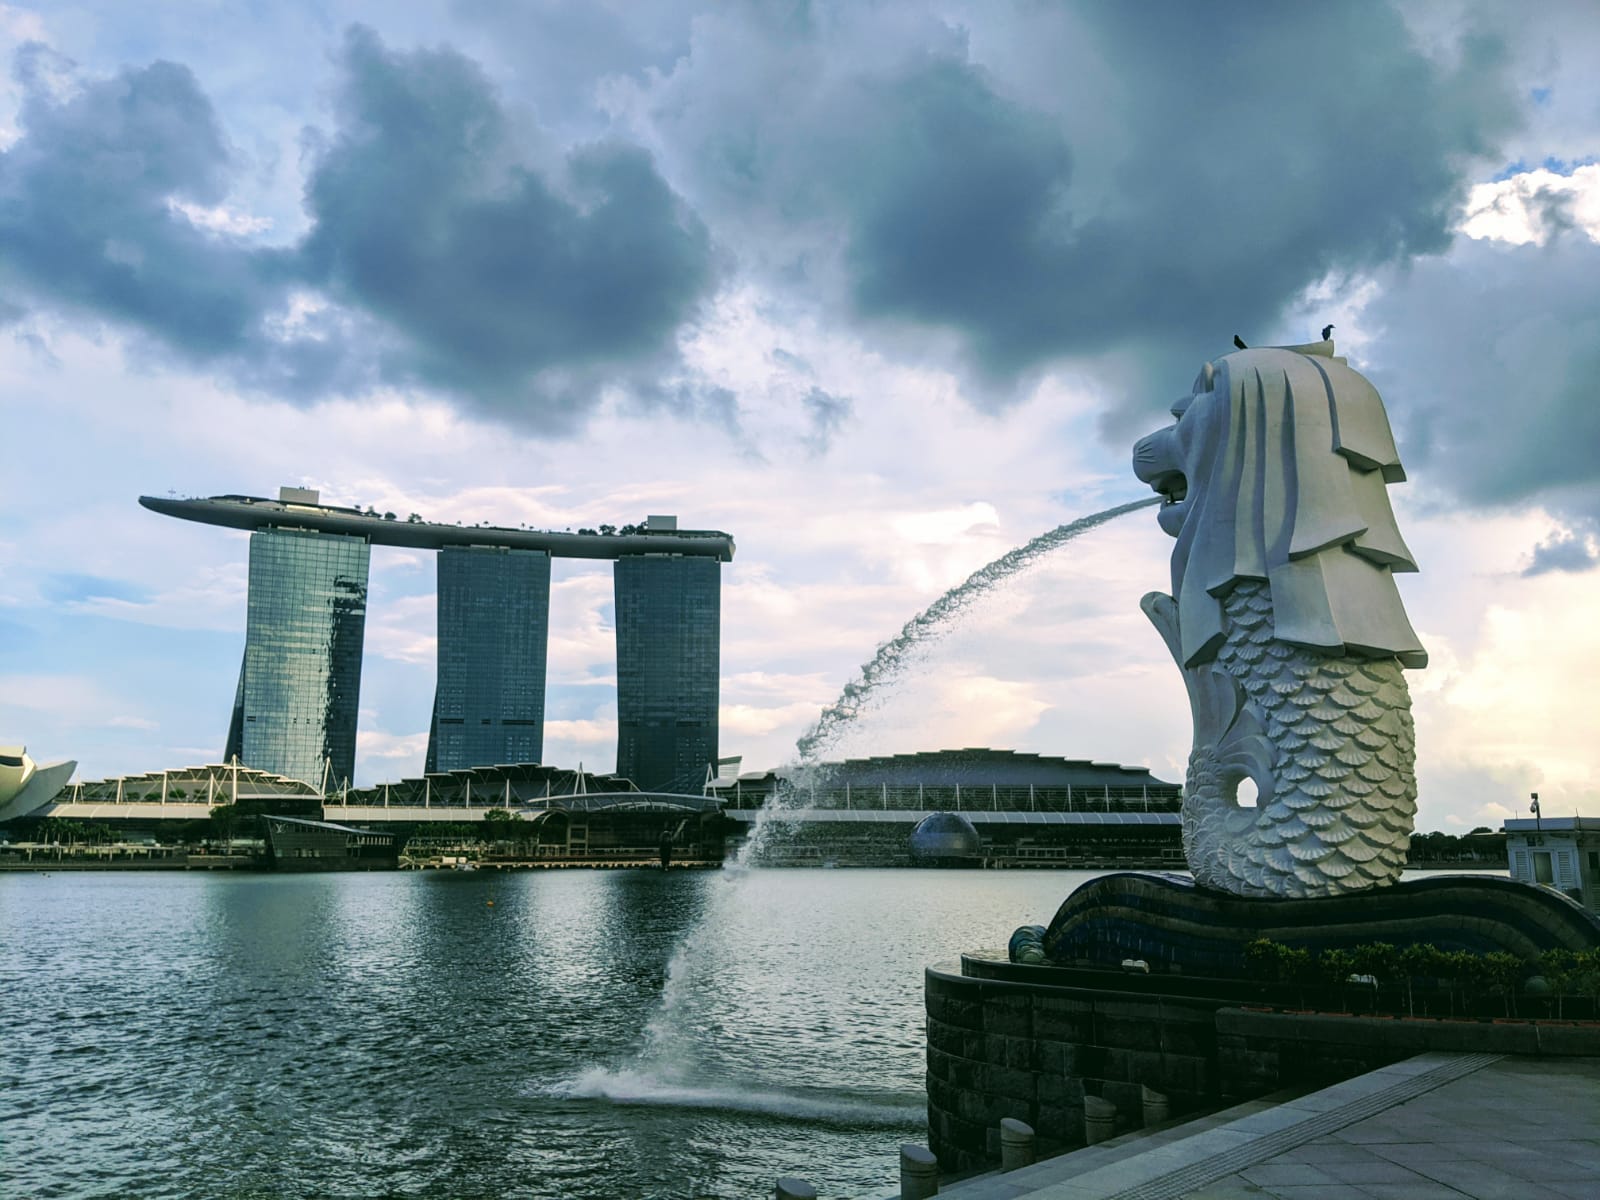 Now Singapore steps out of full lockdown mode